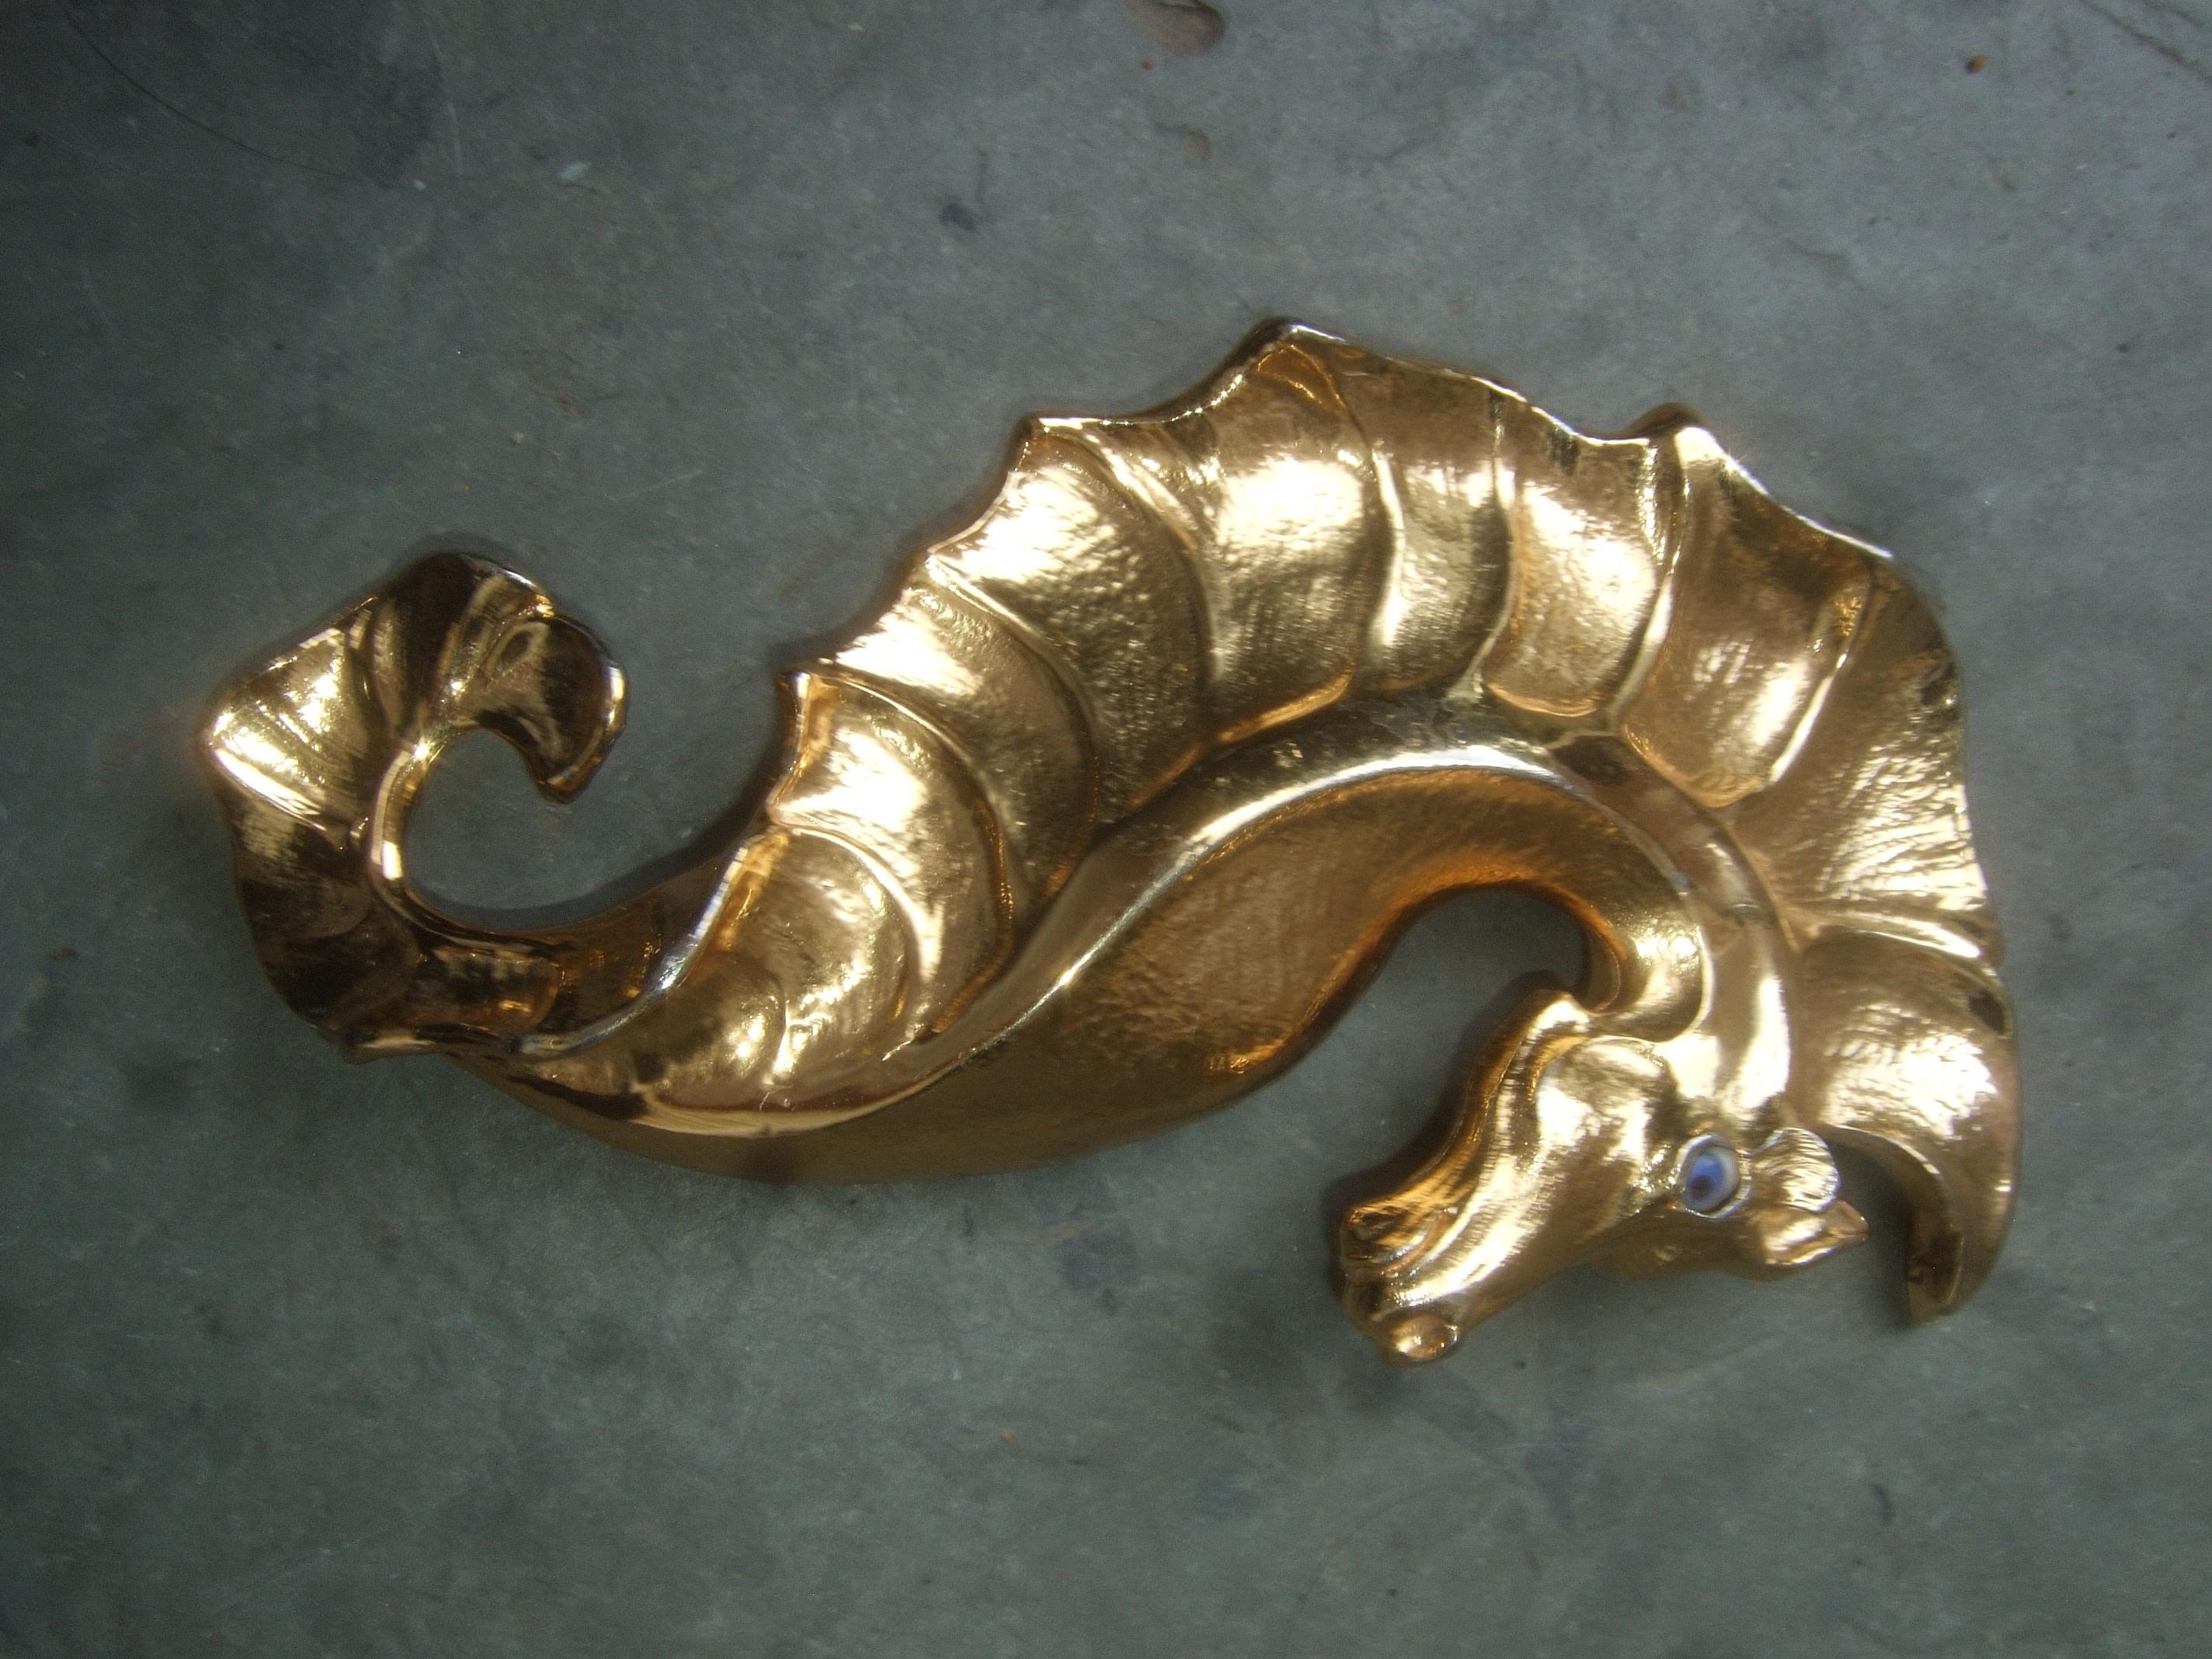 Christopher Ross Rare Massive 24k Gold Plated Seahorse Belt Buckle c 1980s For Sale 2